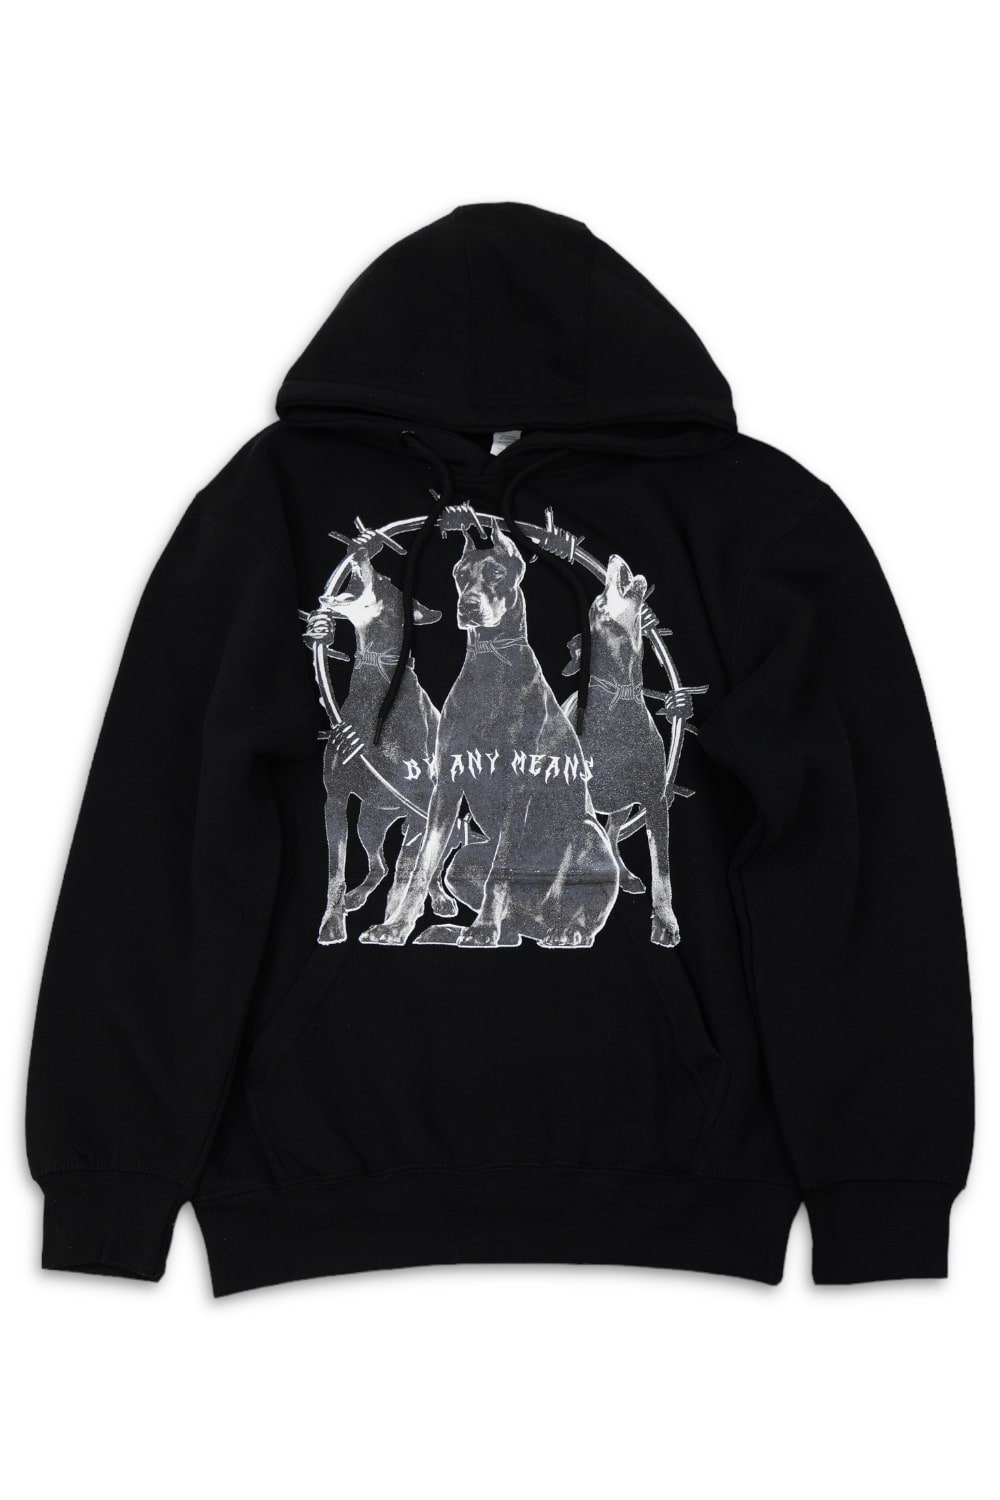 Graphic Hoodies - By Any Means